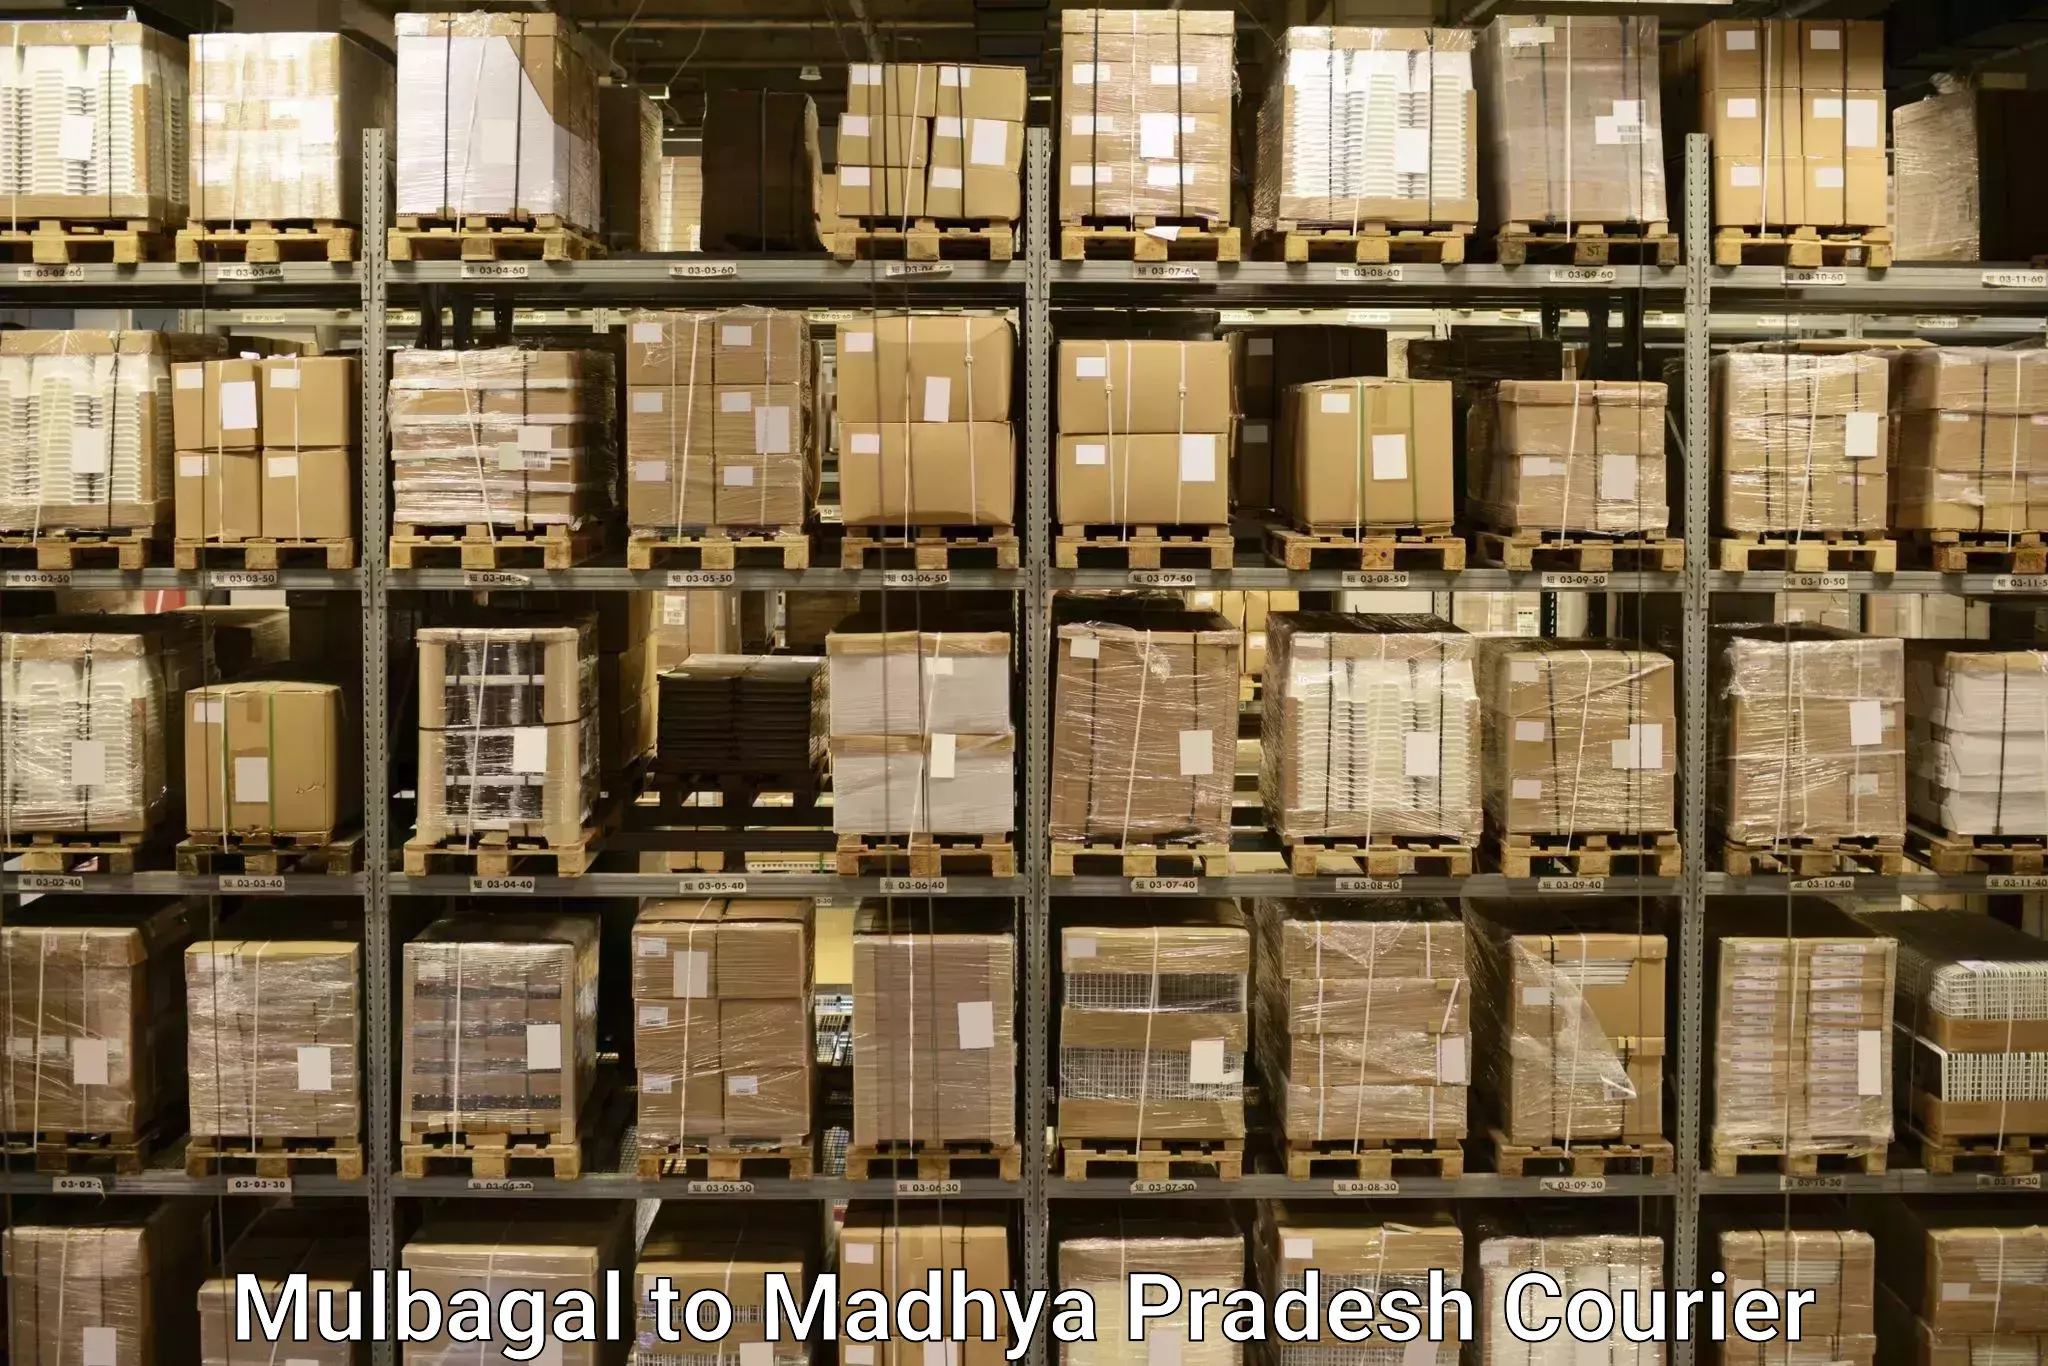 Personal effects shipping Mulbagal to Gotegaon